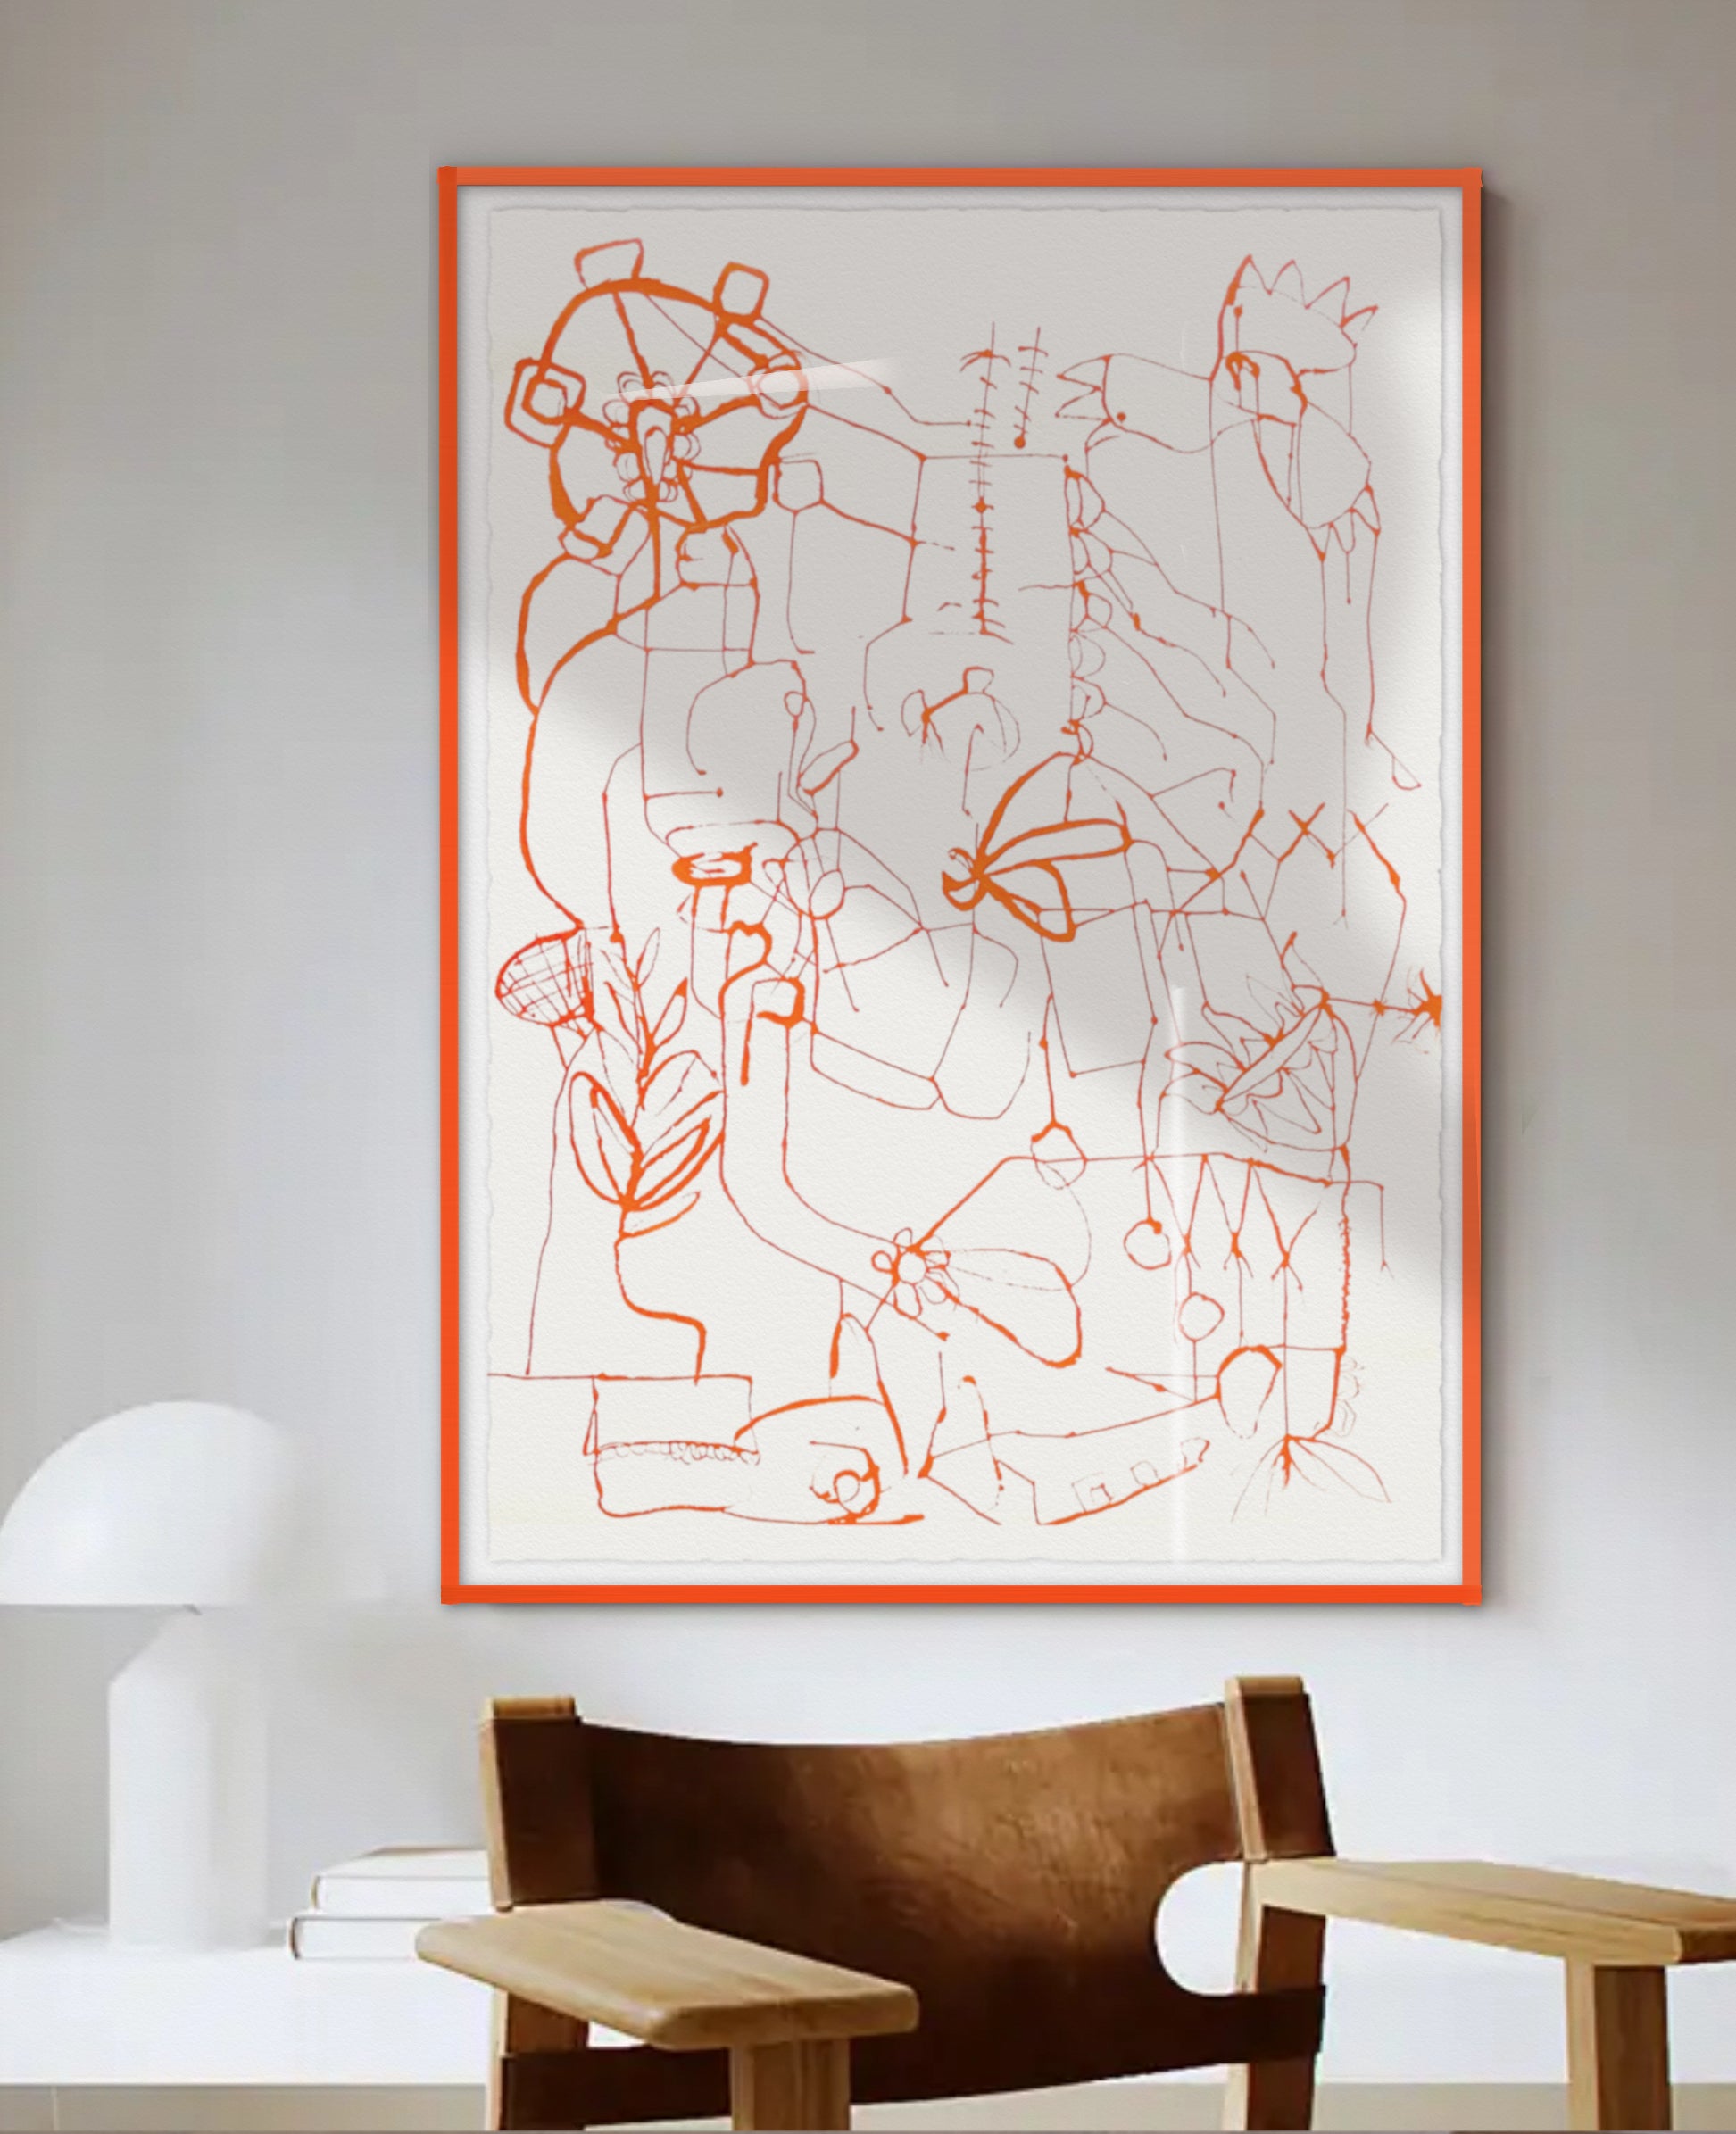 orange abstract painting by Lilo on Paper hanging in e mid century home art for sale luxury original pieces 